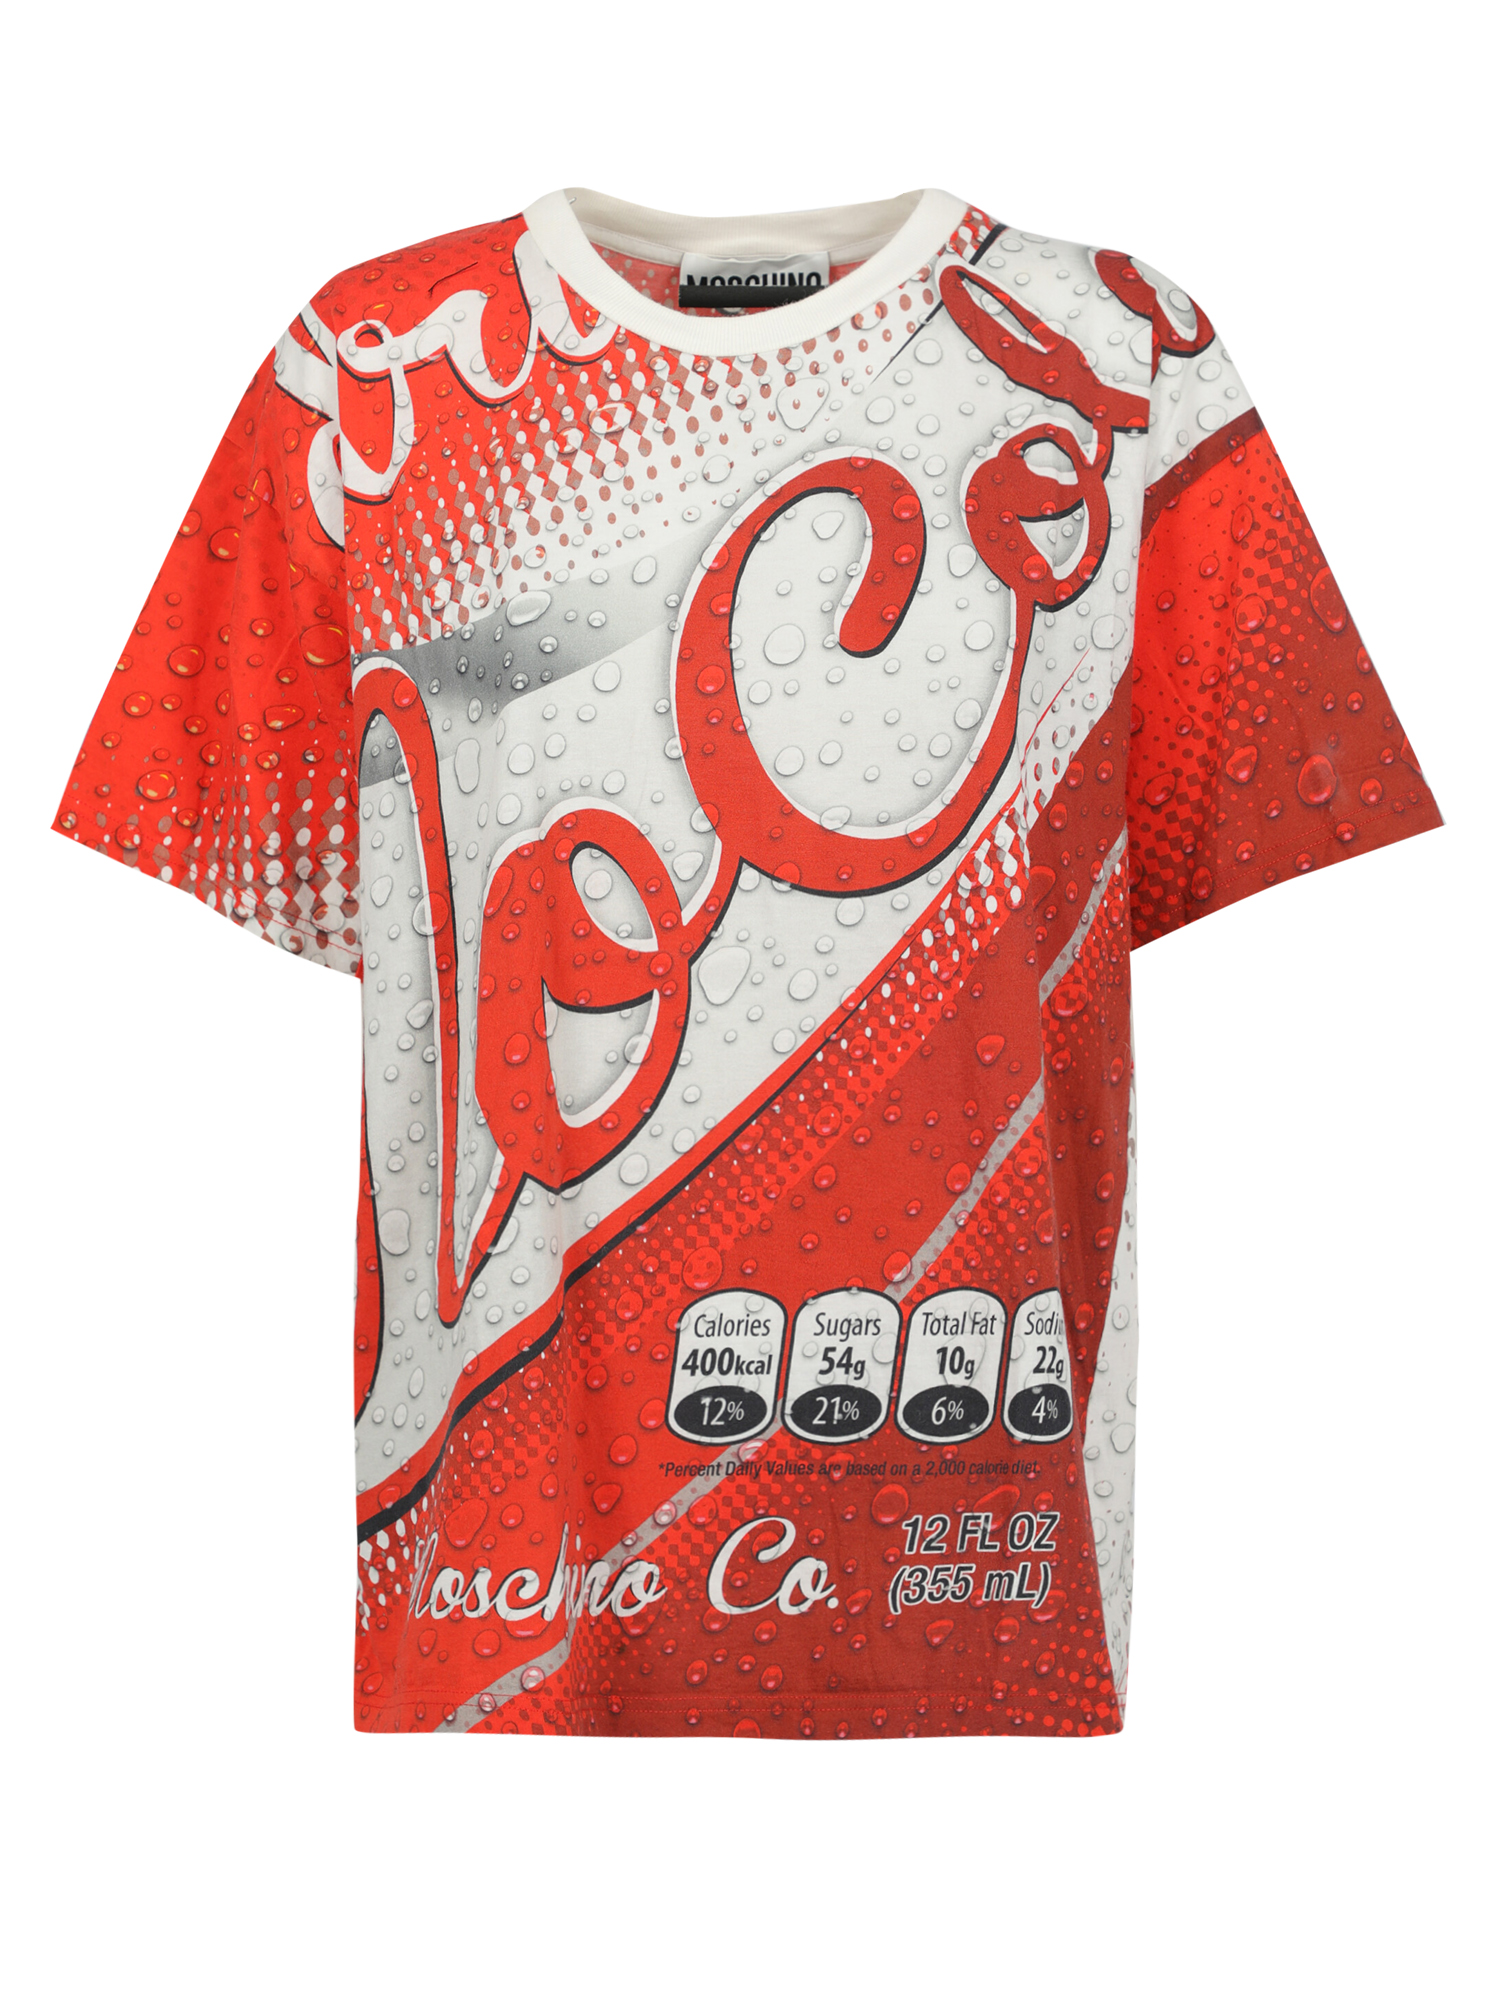 Moschino Femme T-shirts et tops Red, White Cotton